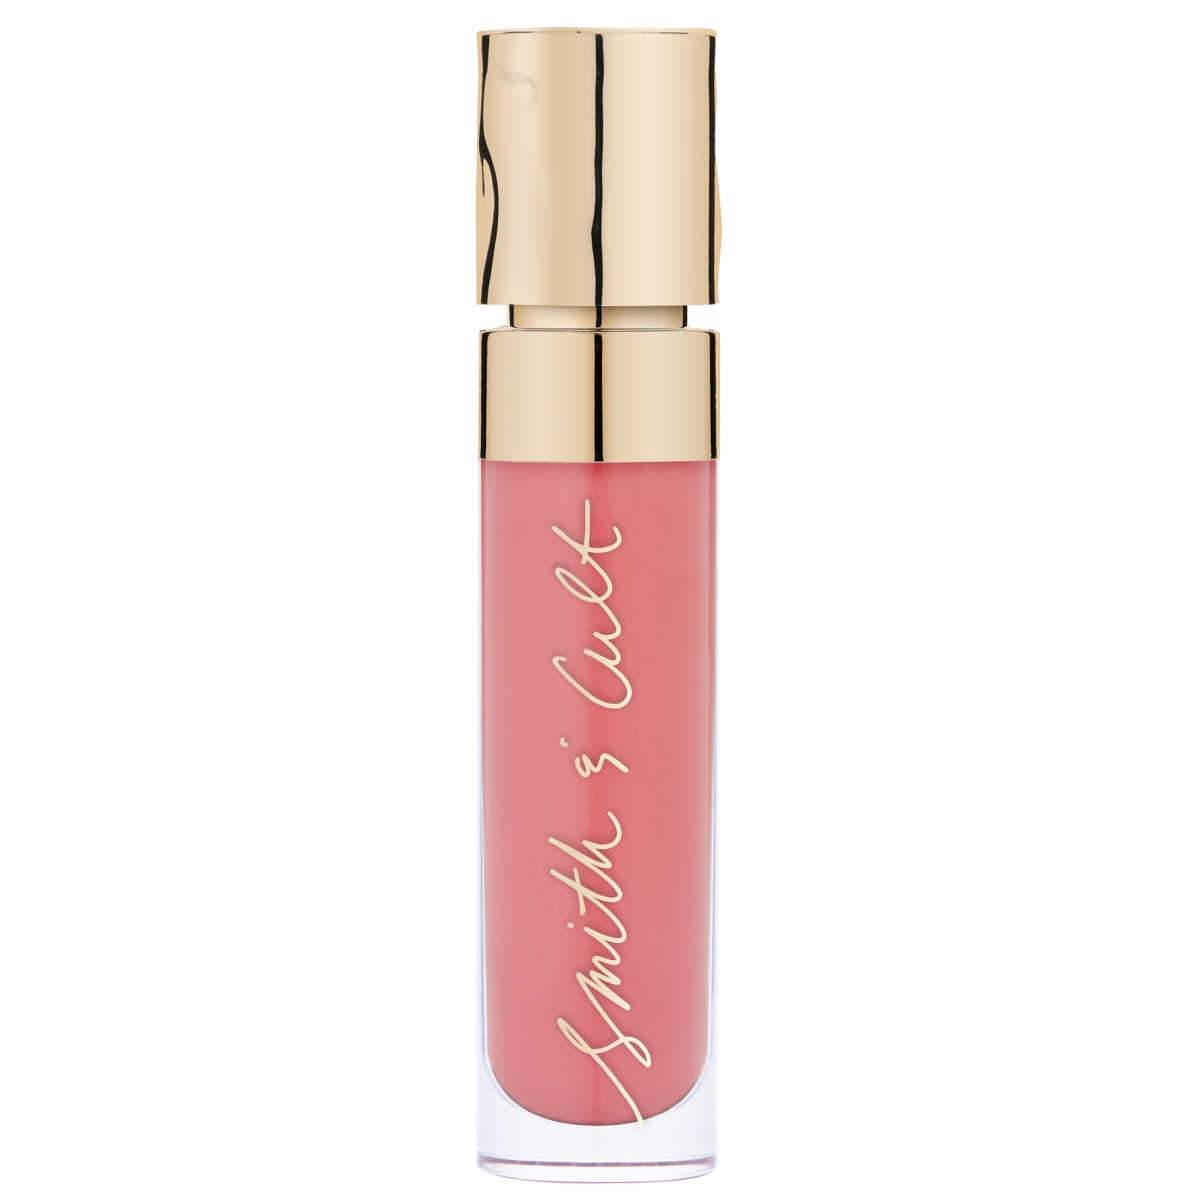 Smith & Cult The Shining Lip Lacquer - The Lovers 5ml - Hairsale.se